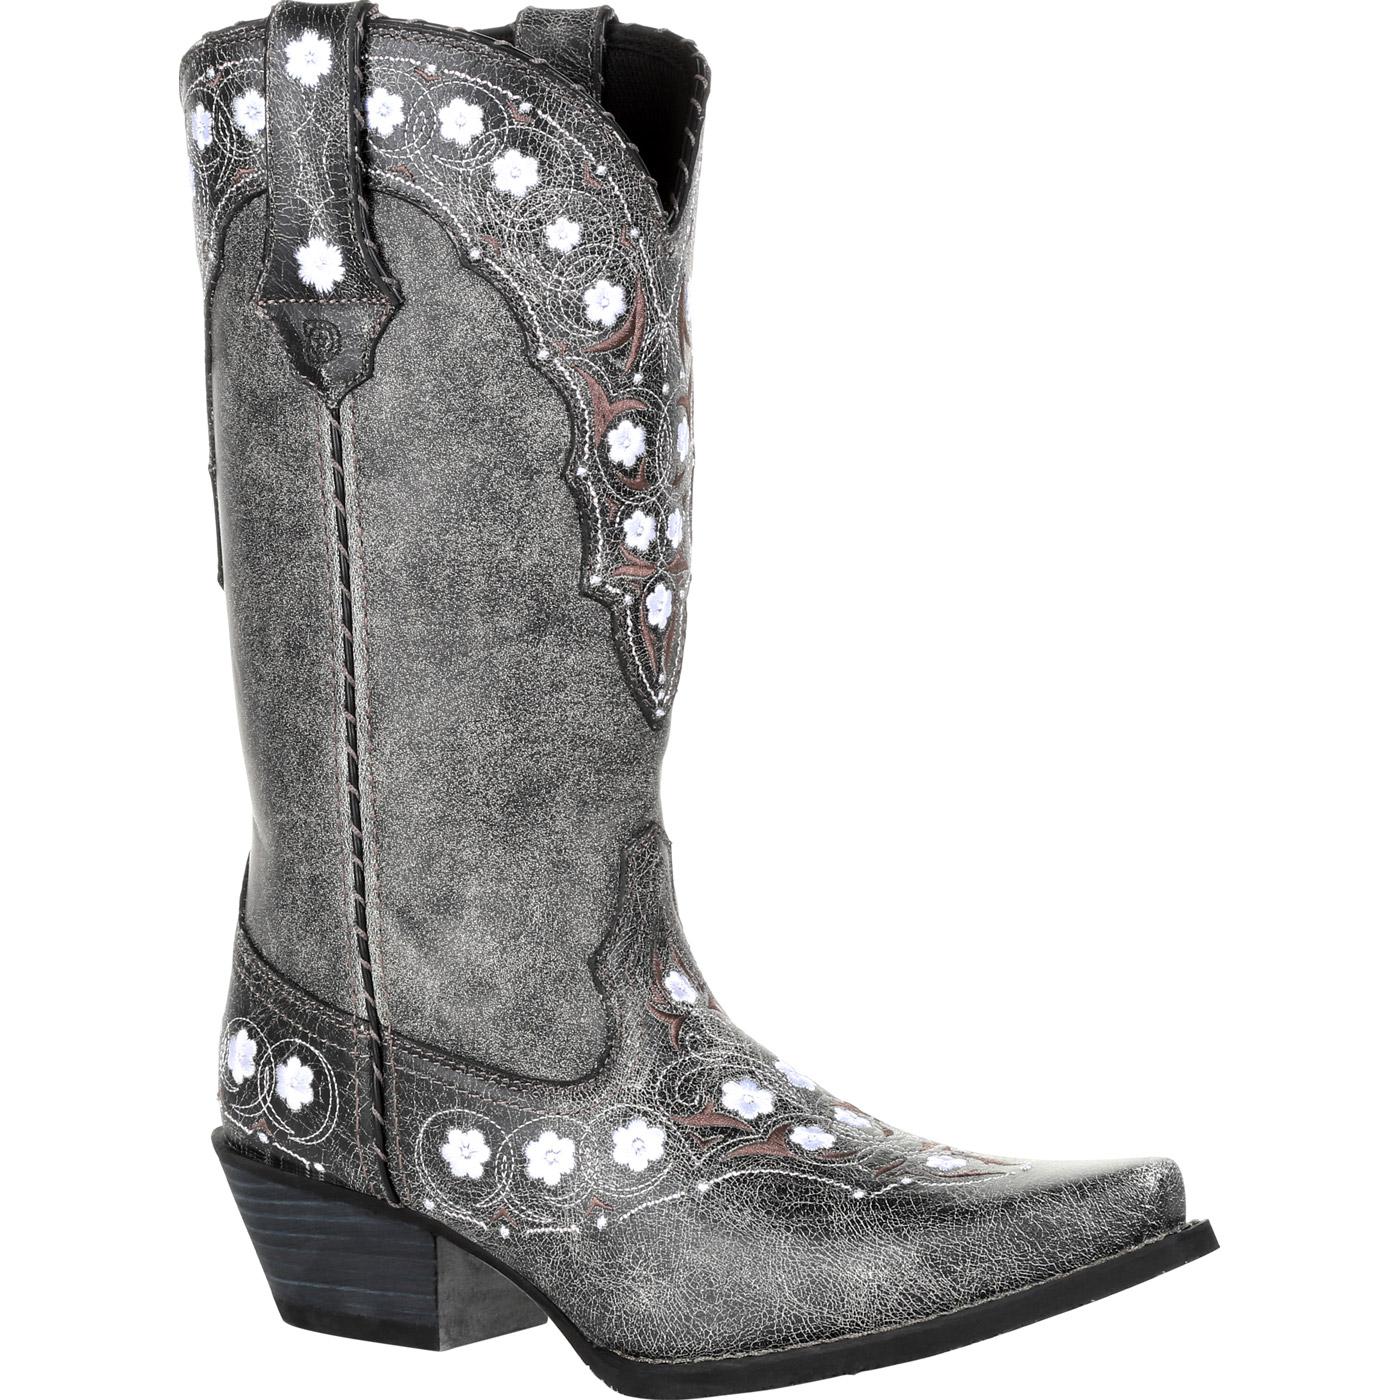 Crush™ by Durango® Women's Pewter Floral Western Boot, #DRD0361